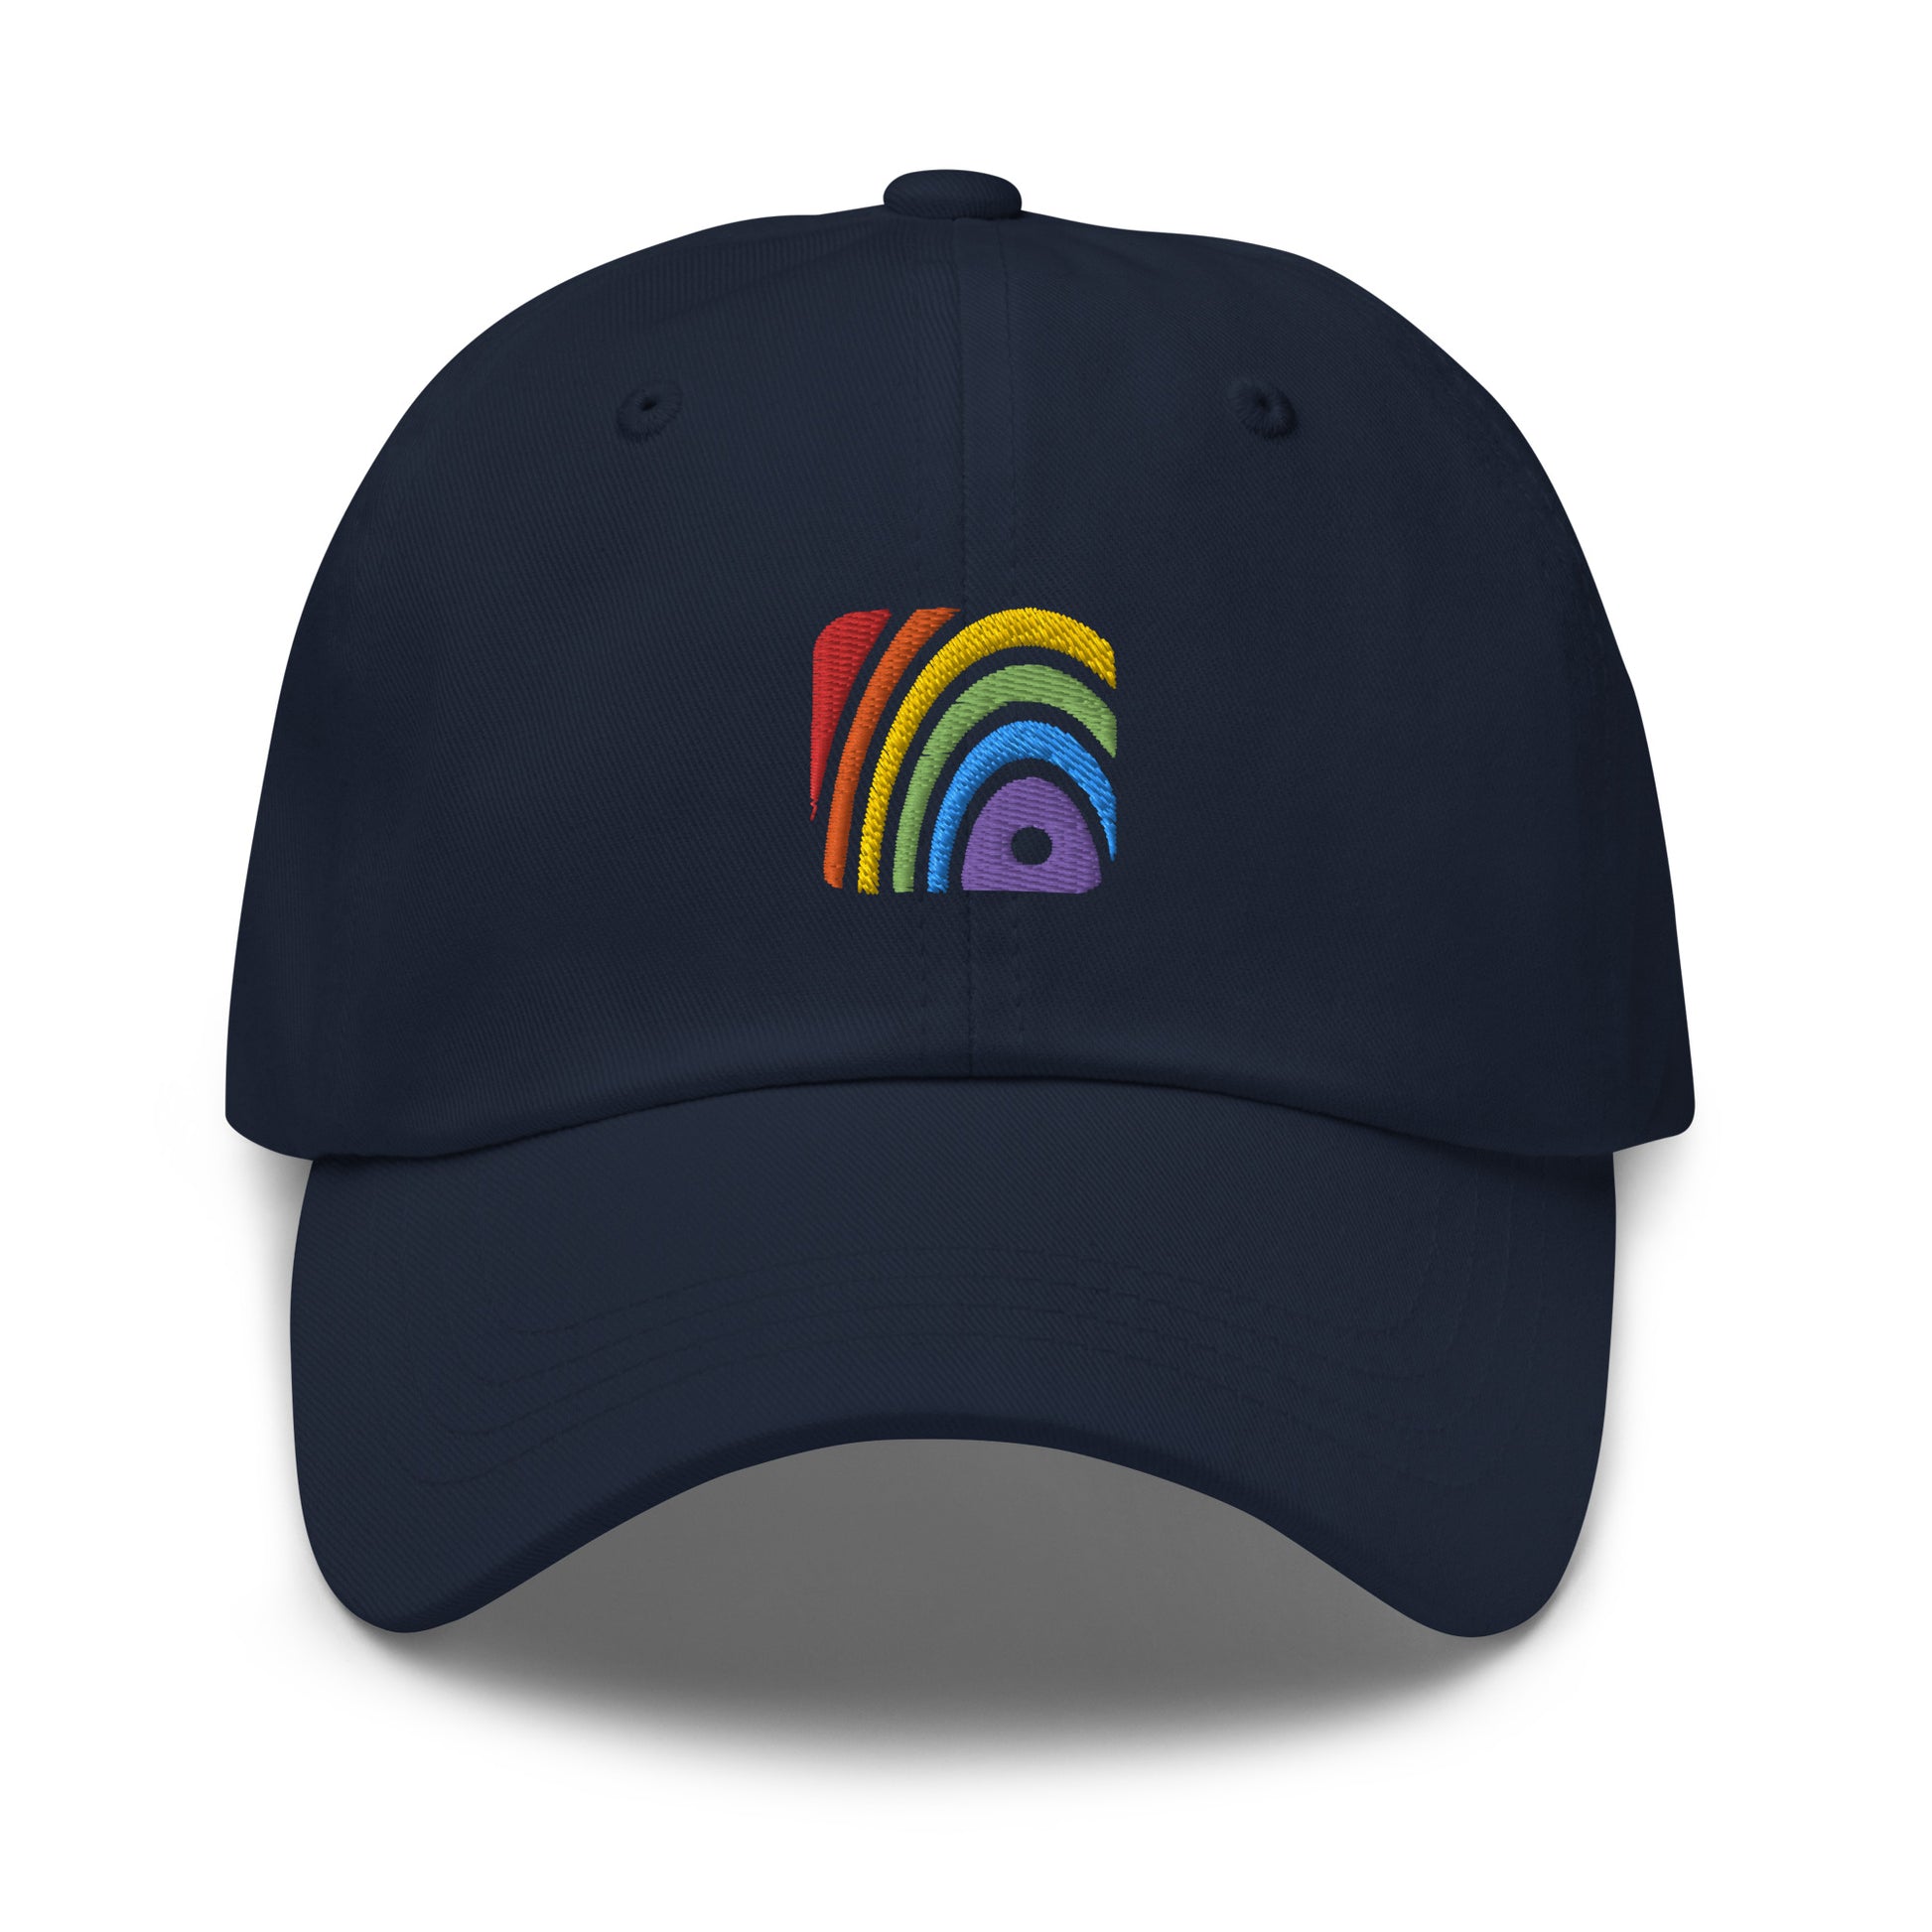 Navy baseball hat featuring rainbow design embroidery with a low profile, adjustable strap.